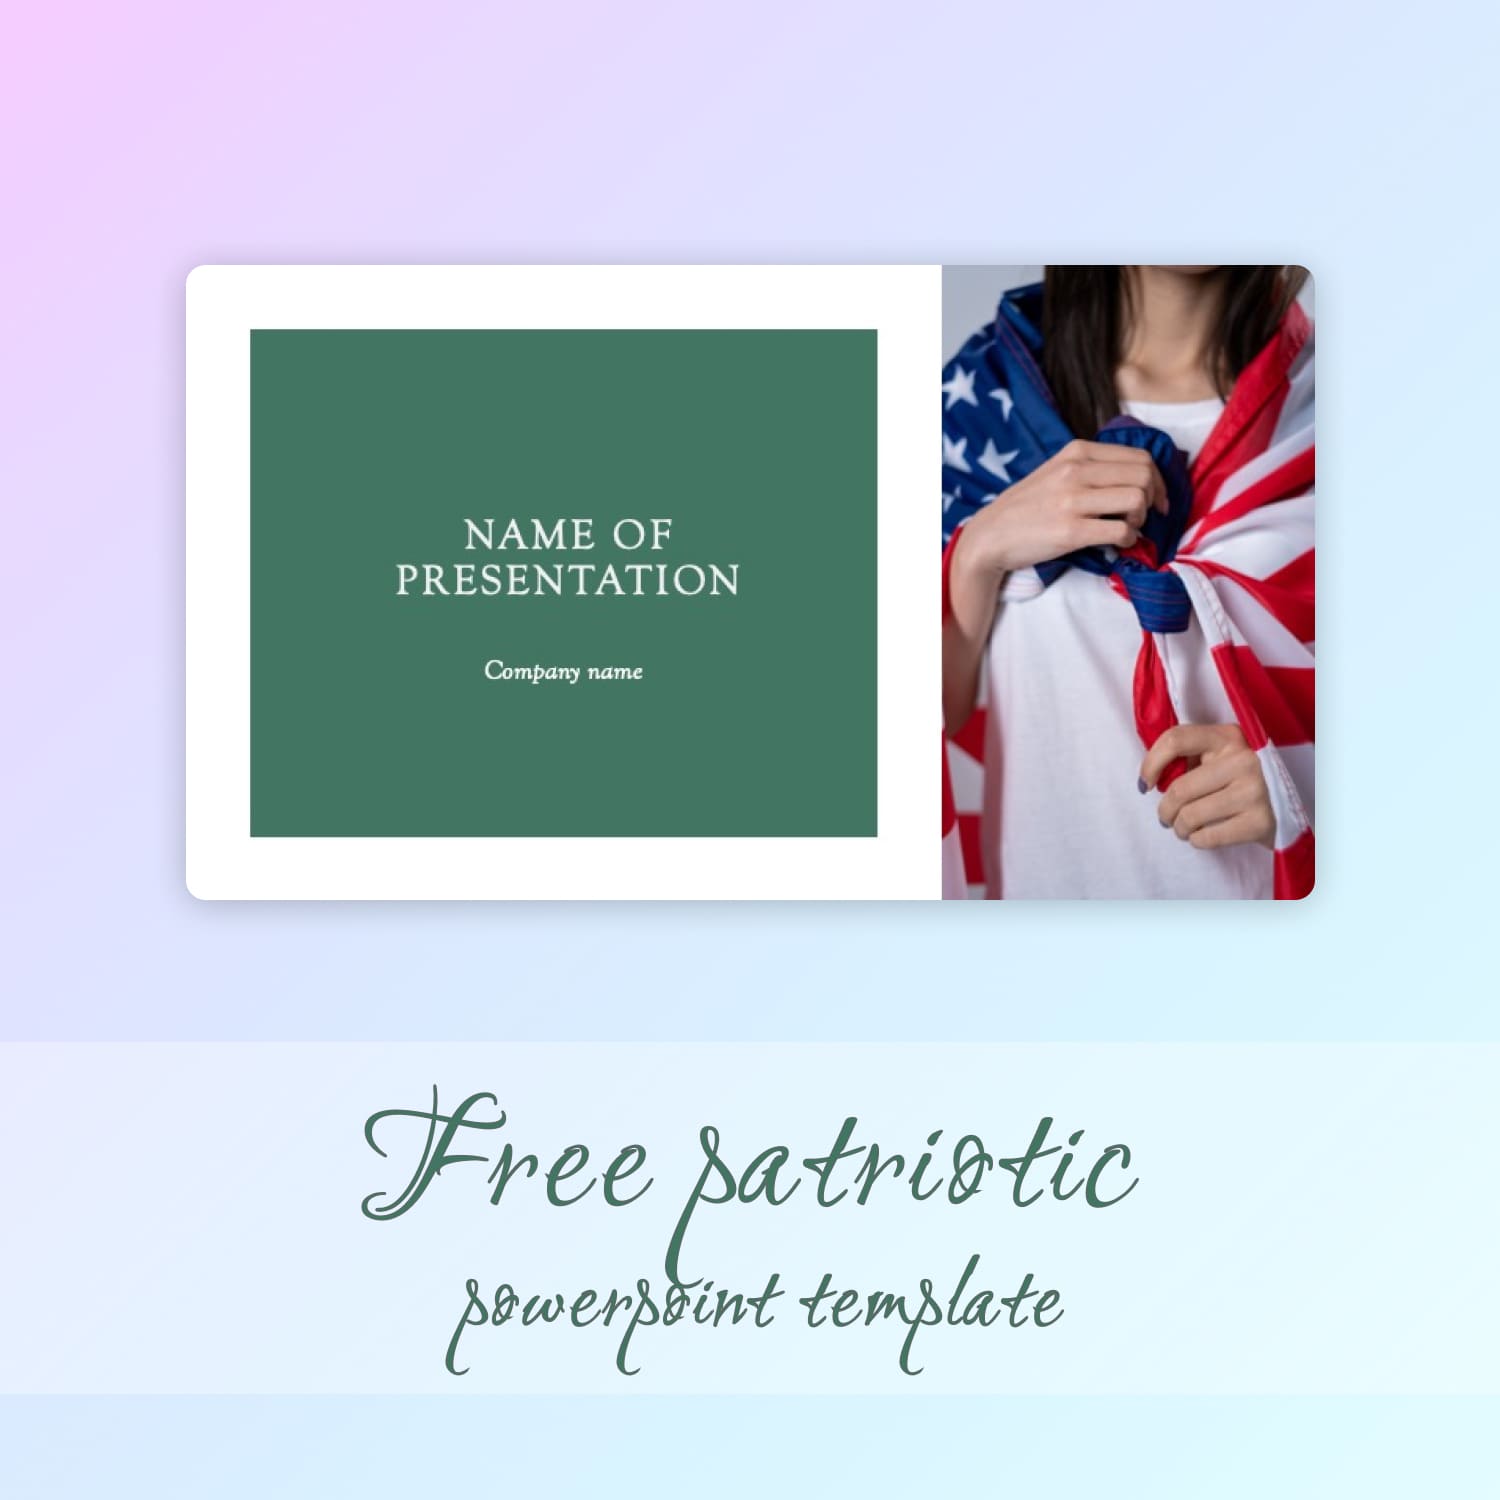 Free Patriotic Backgrounds For Powerpoint.